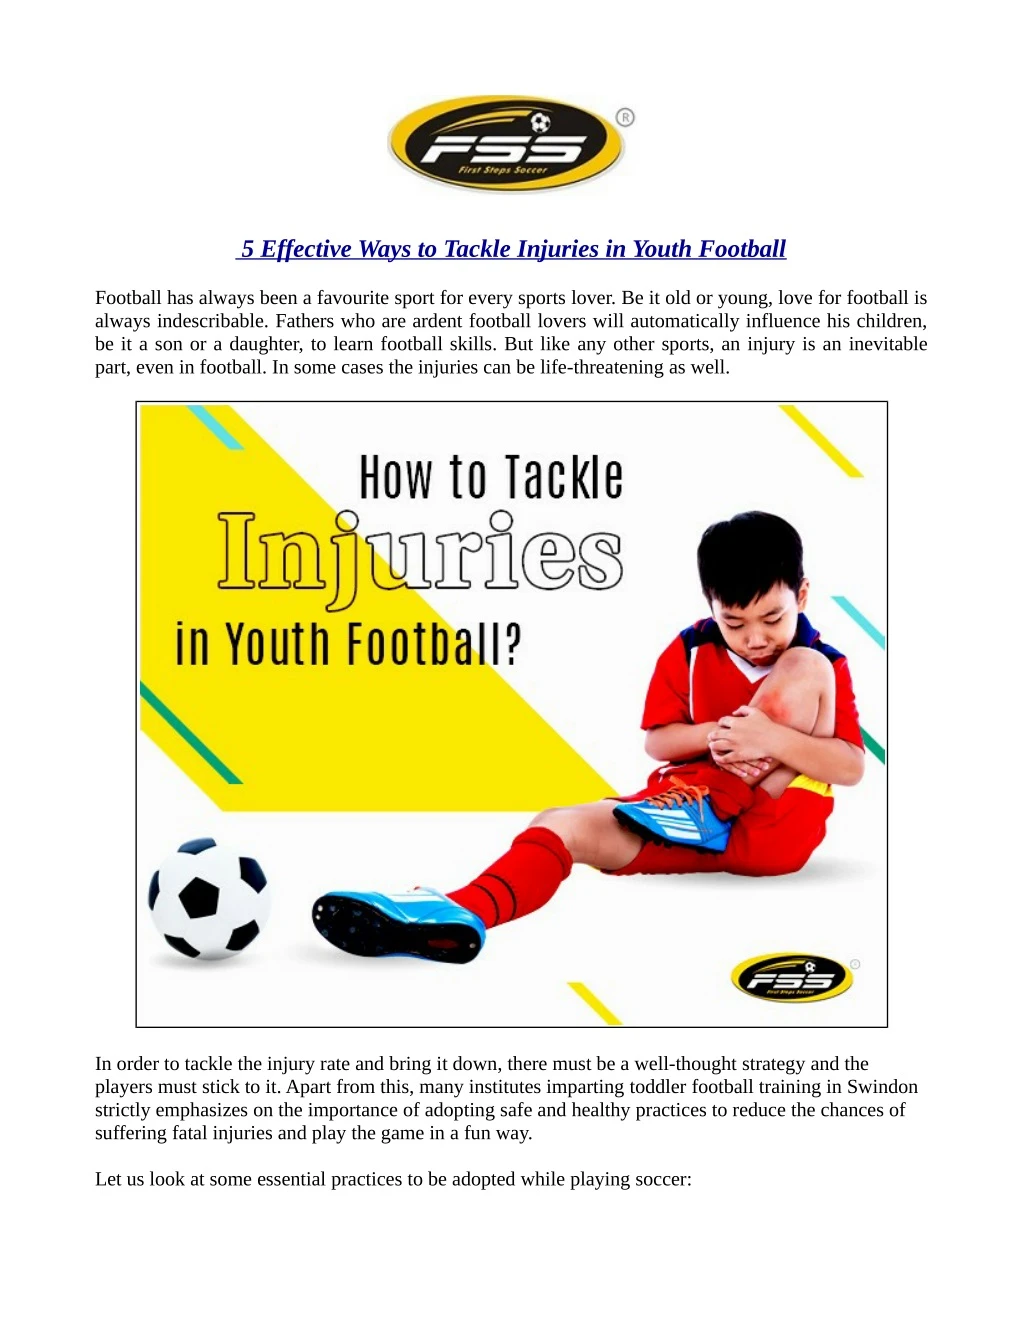 5 effective ways to tackle injuries in youth